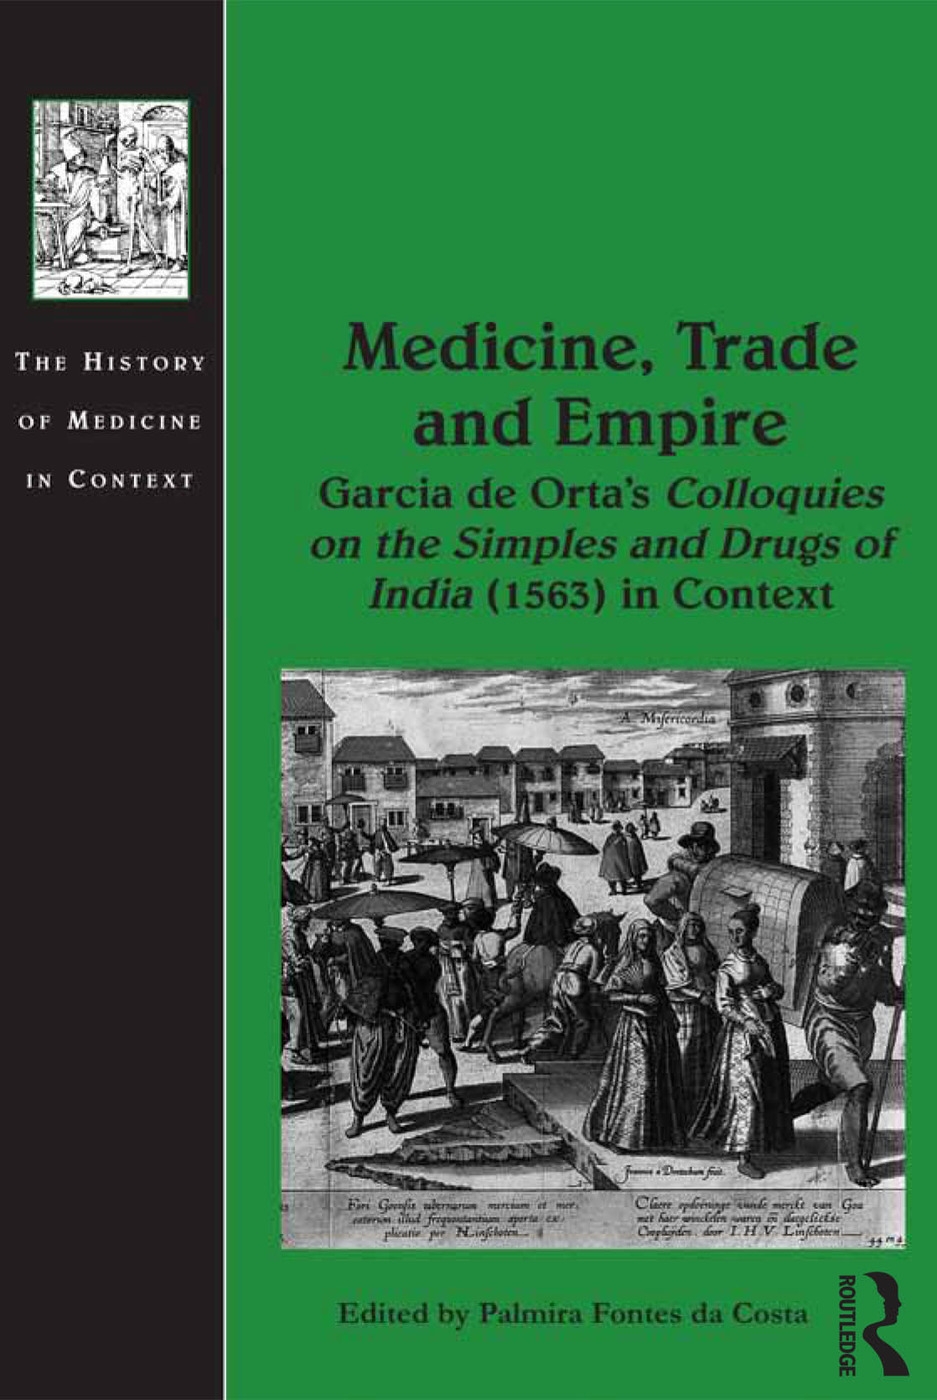 Medicine, Trade and Empire: Garcia de Orta’s Colloquies on the Simples and Drugs of India (1563) in Context